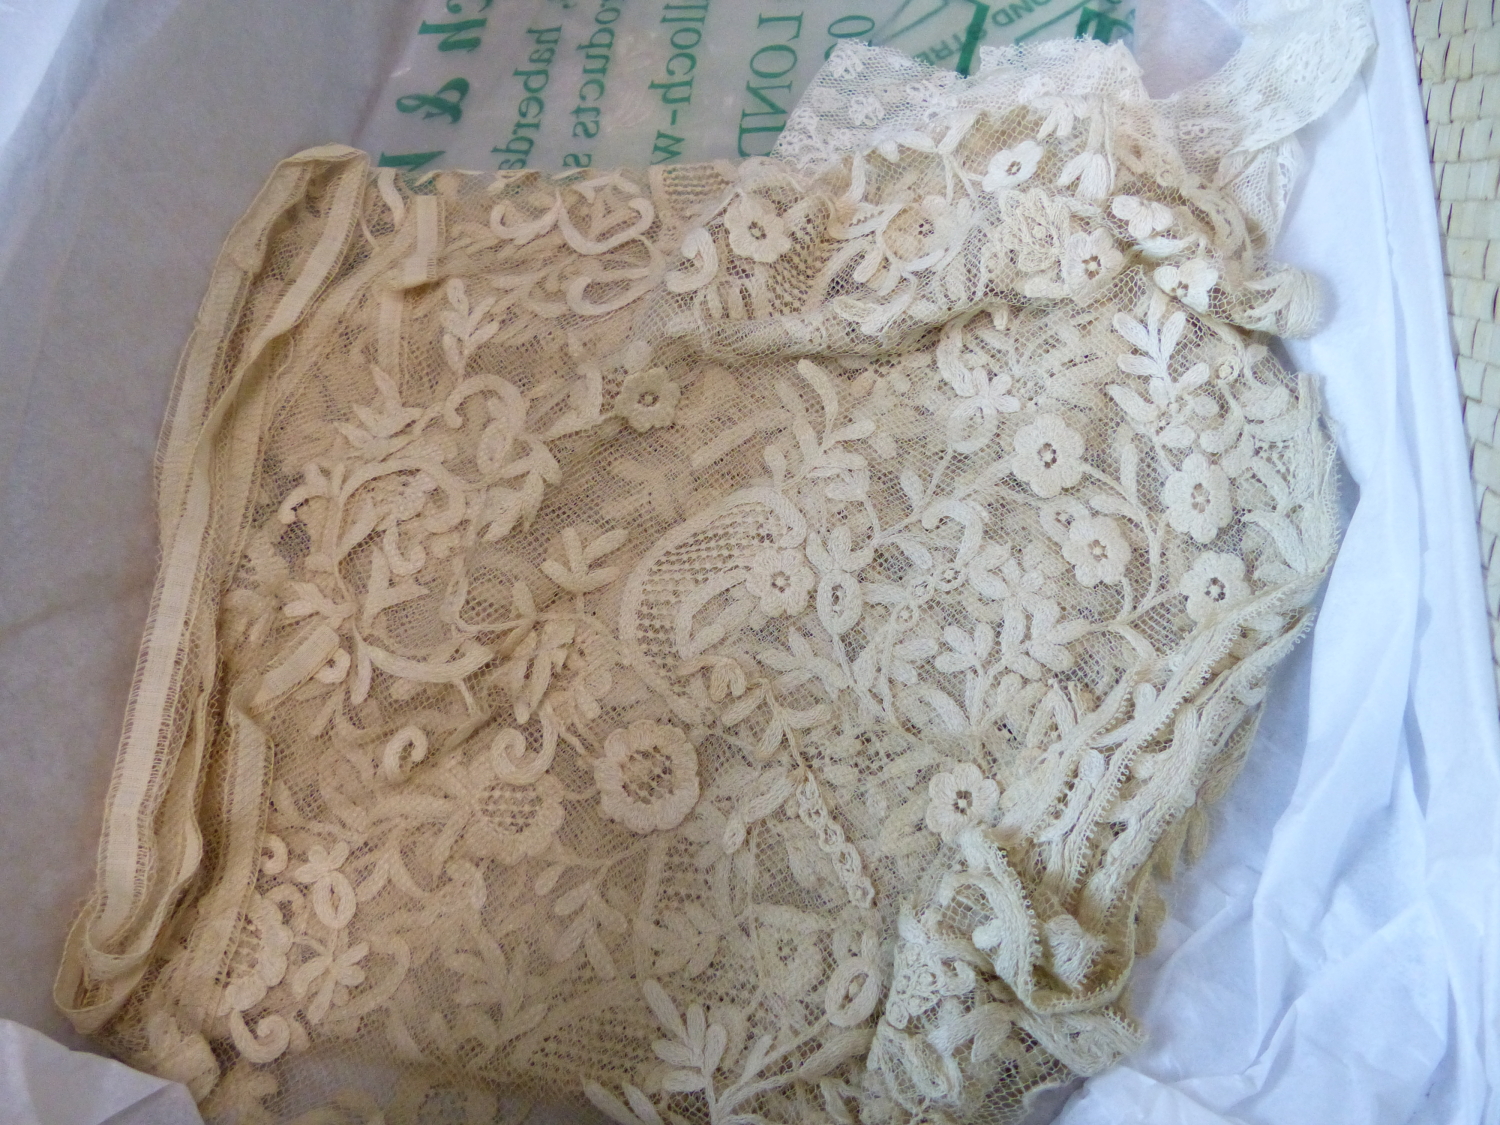 A SMALL COLLECTION OF ANTIQUE AND FINELY WORKED LACE, TO INCLUDE A SHAWL, VEILS, ETC. - Image 7 of 15